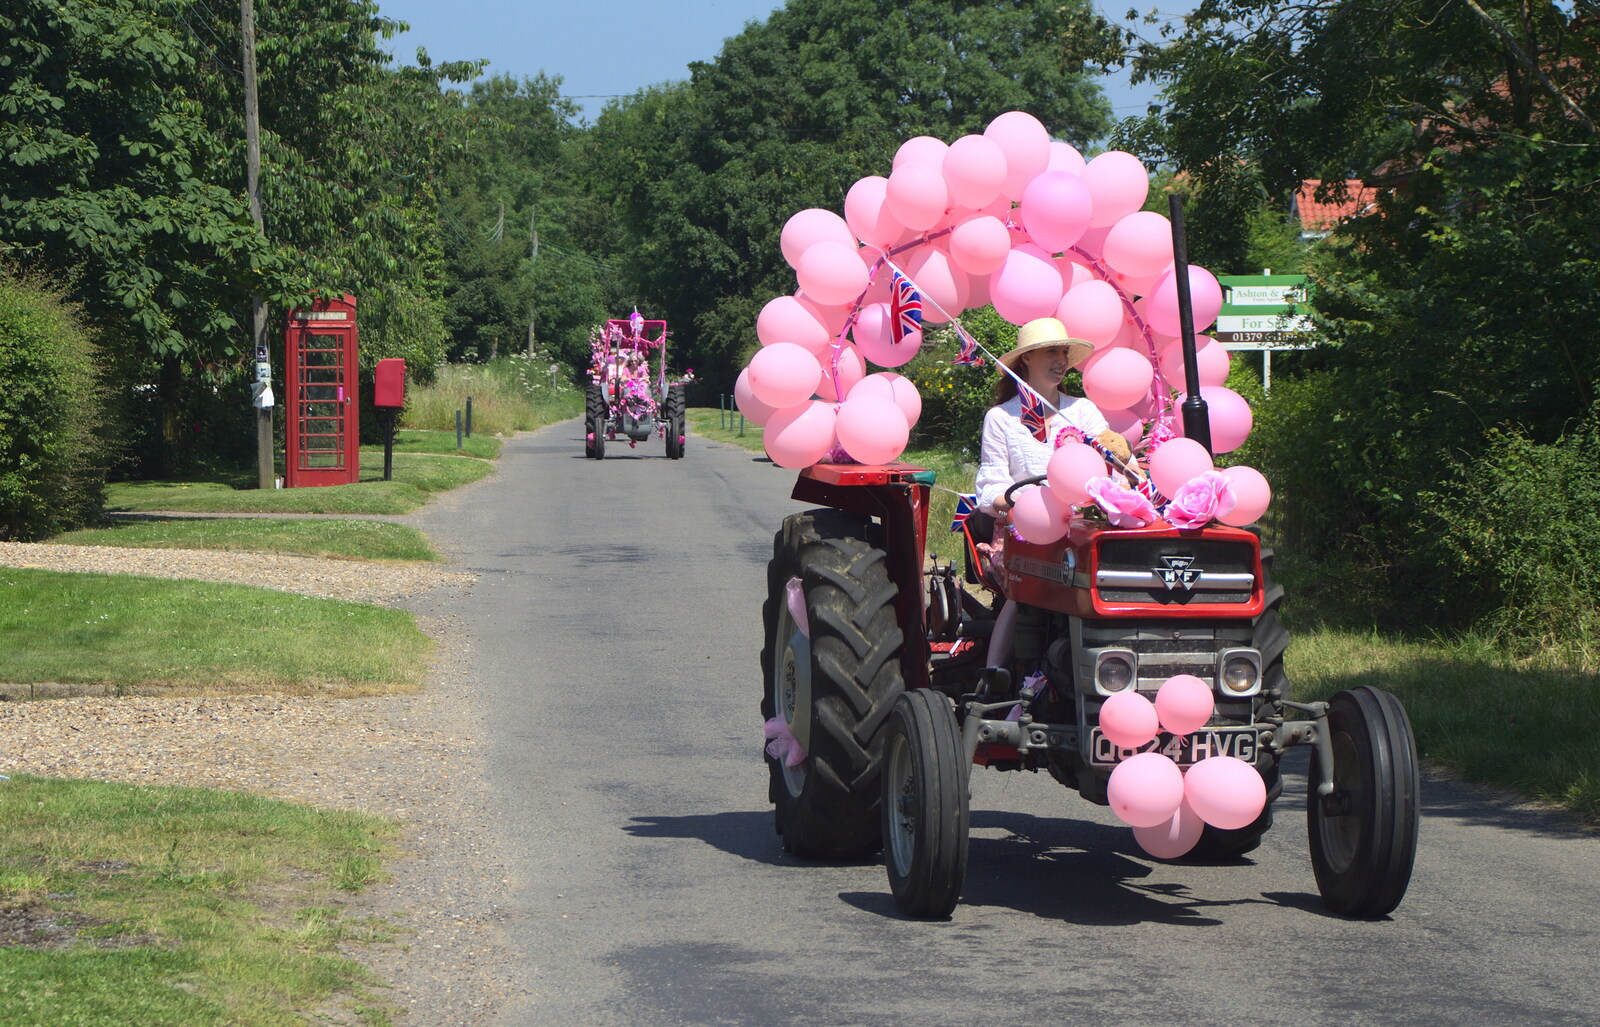 Another tractor is done up with balloons from The "Pink Ladies" Tractor Run and Barbeque, Thorpe Abbots, Norfolk - 7th July 2013